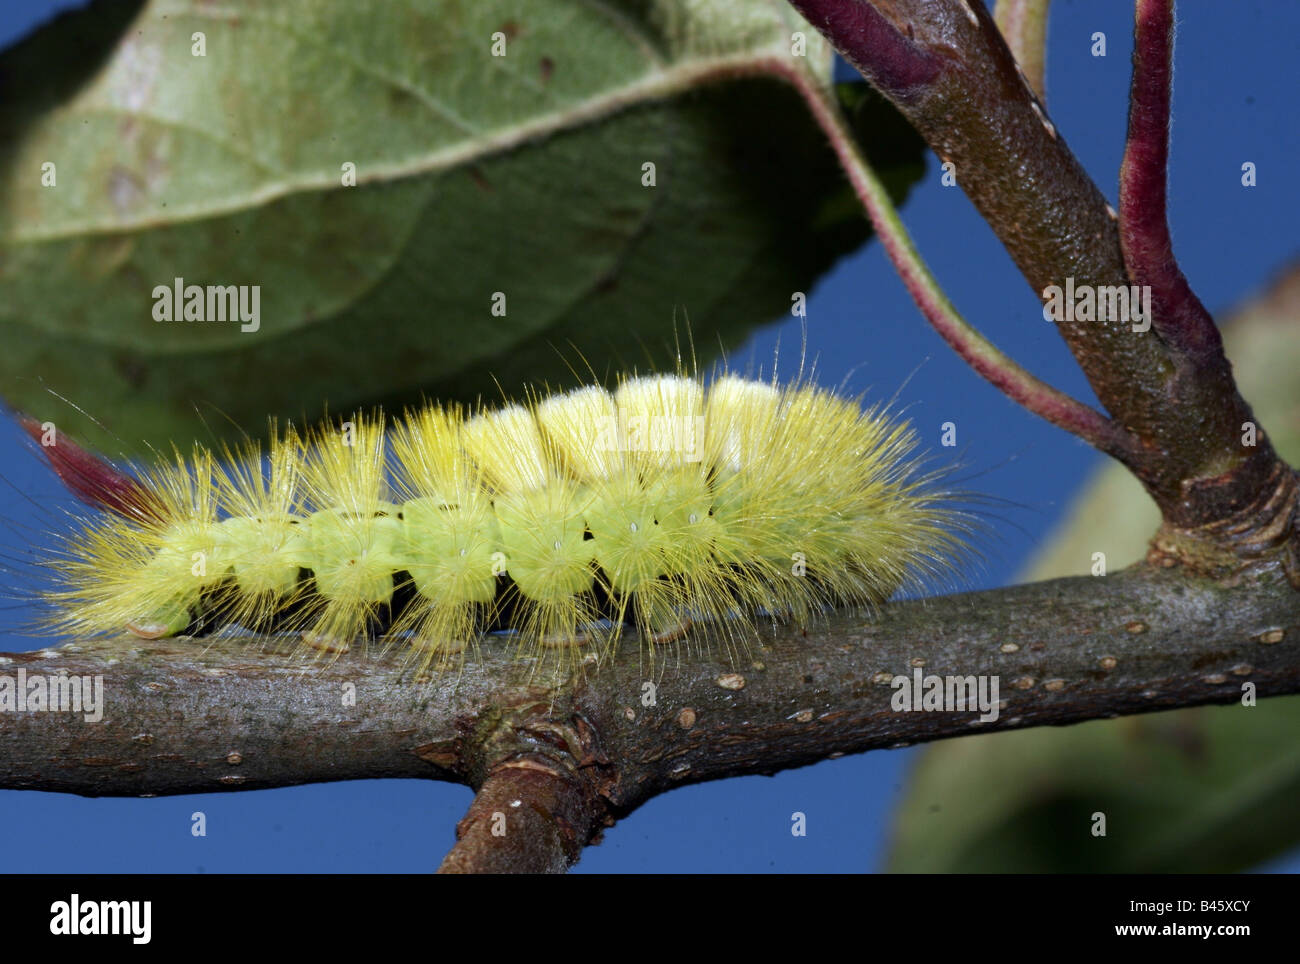 zoology / animals, insect, butterflies, pale tussock moth, (Dasychira pudibunda), growth, yellow caterpillar on branch, distribution: Europe, Central Asia, Additional-Rights-Clearance-Info-Not-Available Stock Photo